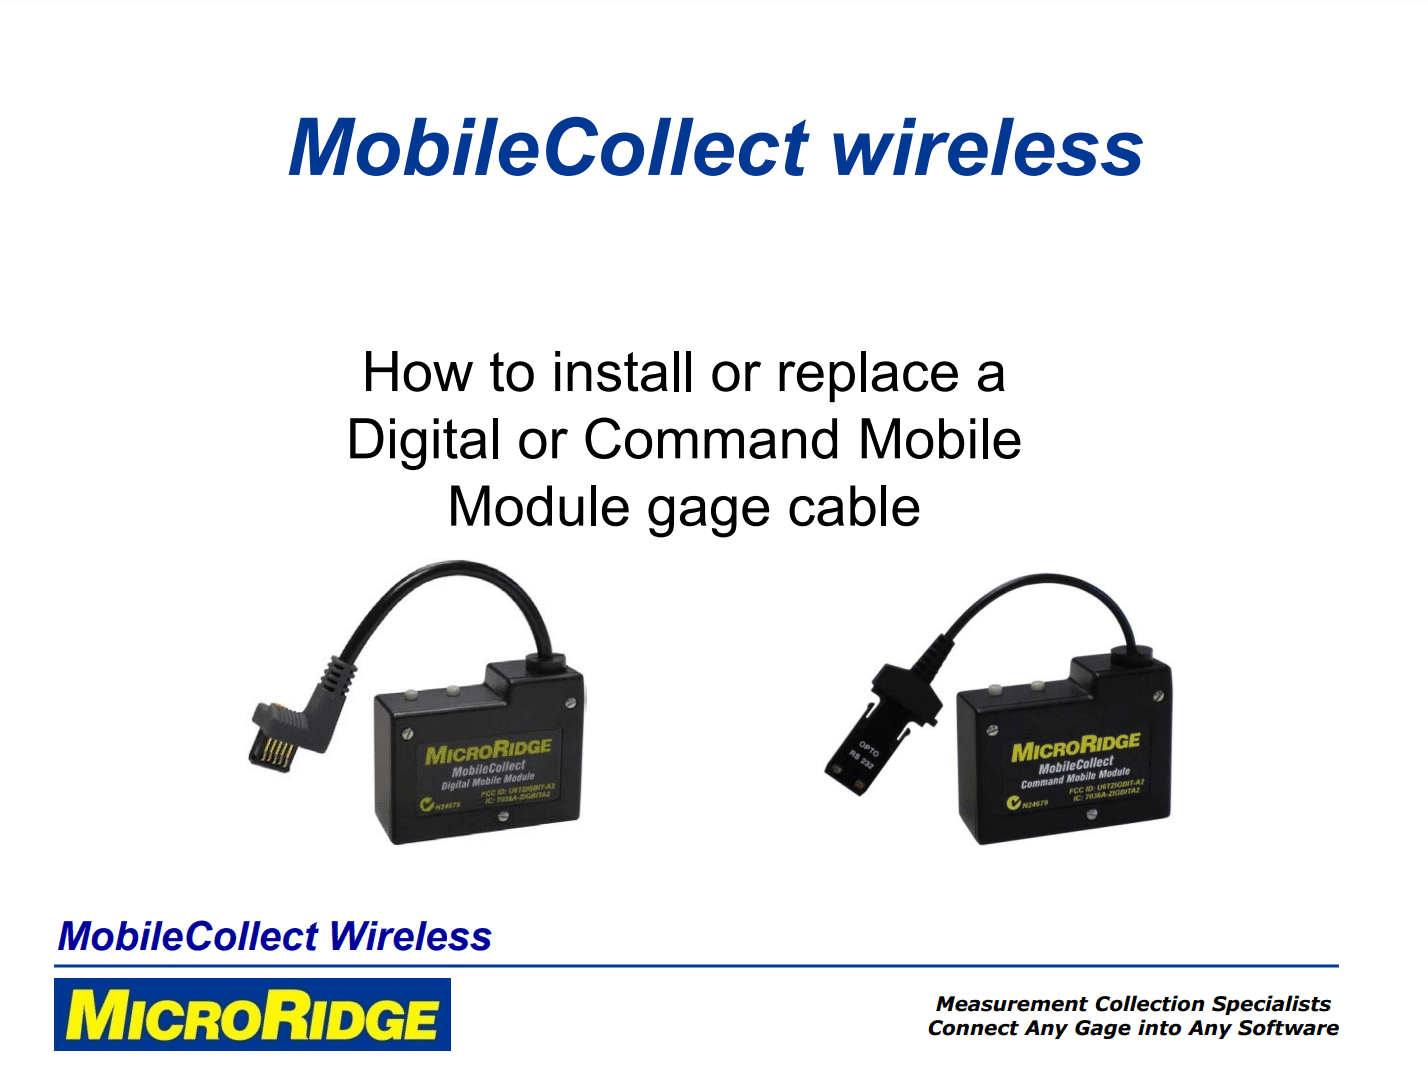 Install or Replace Command or Digital Mobile Module Cable